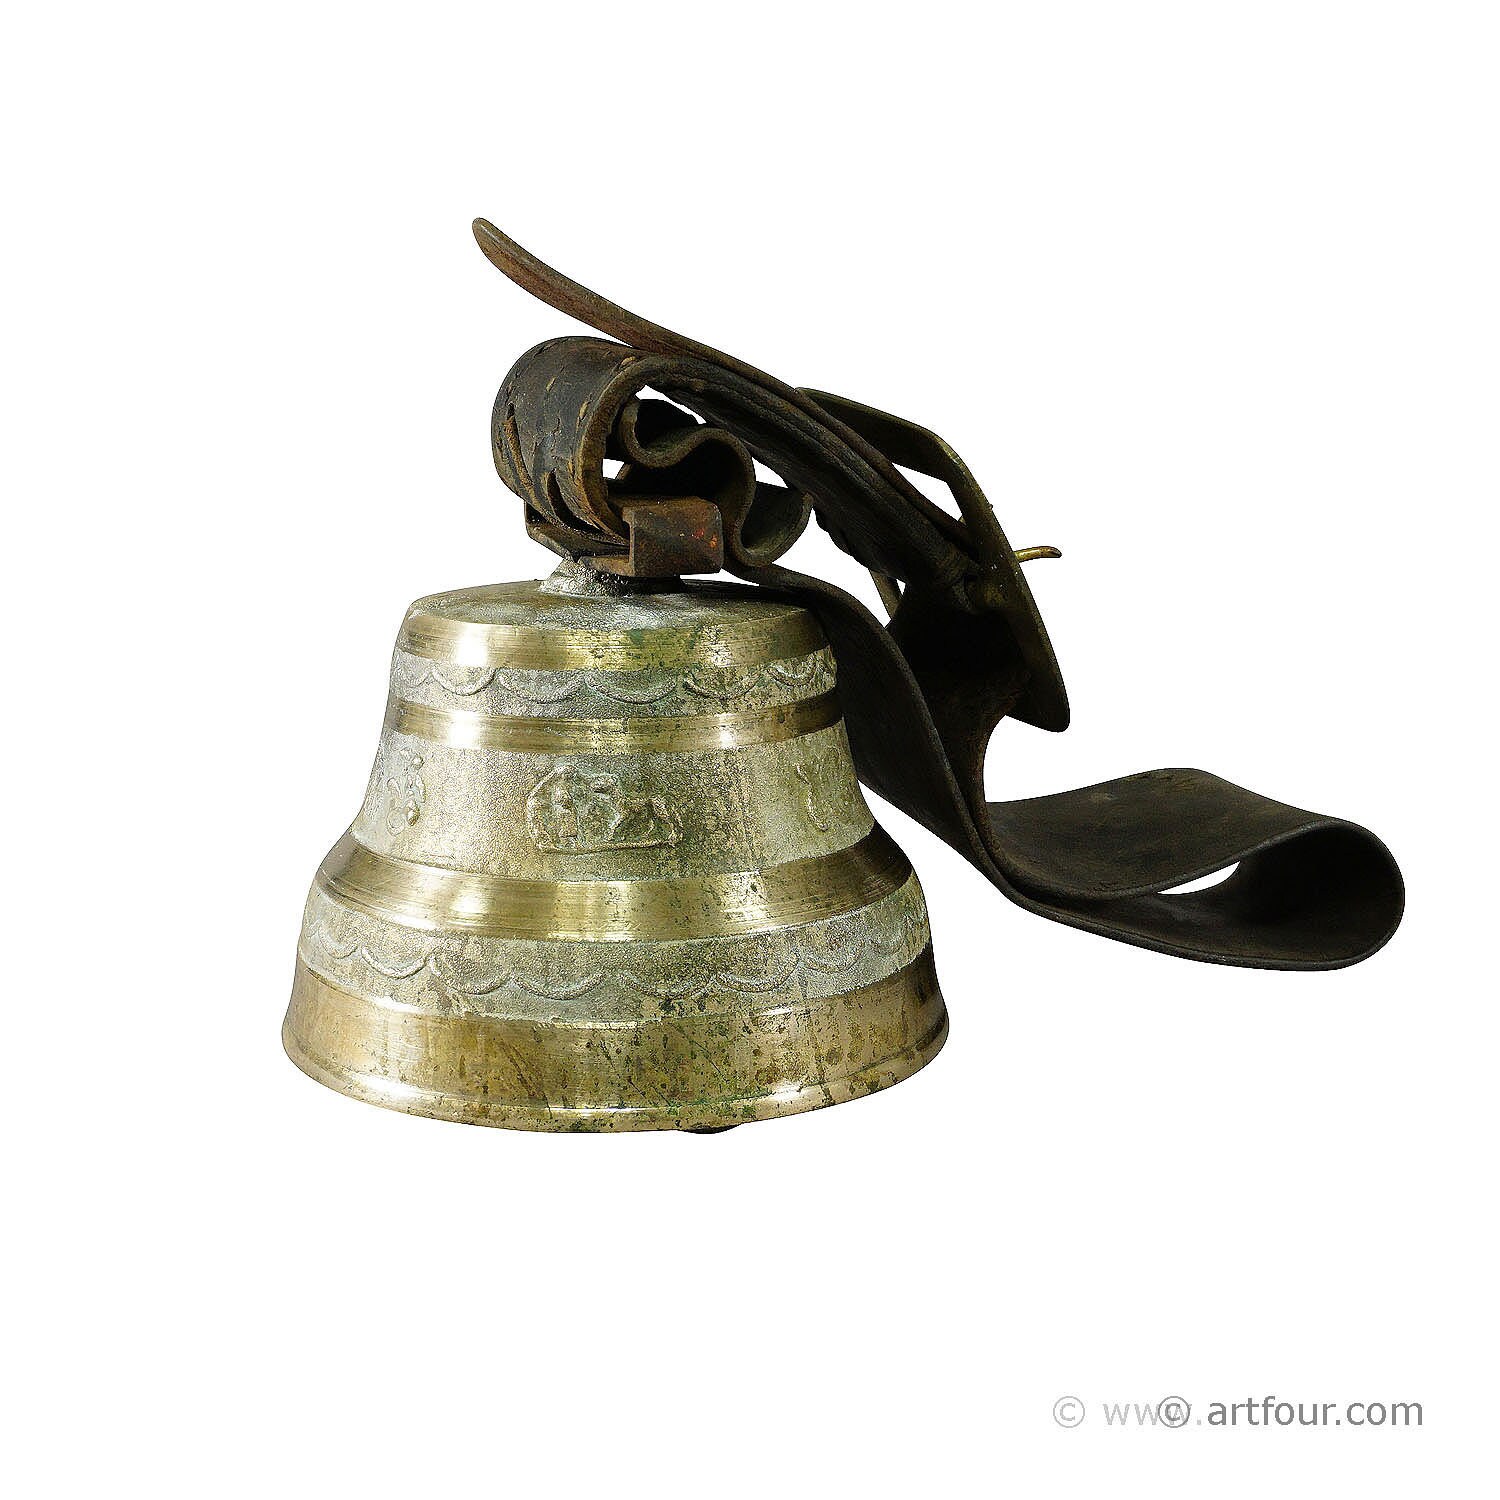 Vintage Swiss Cow Bell in Casted Bronze, 1930 for sale at Pamono